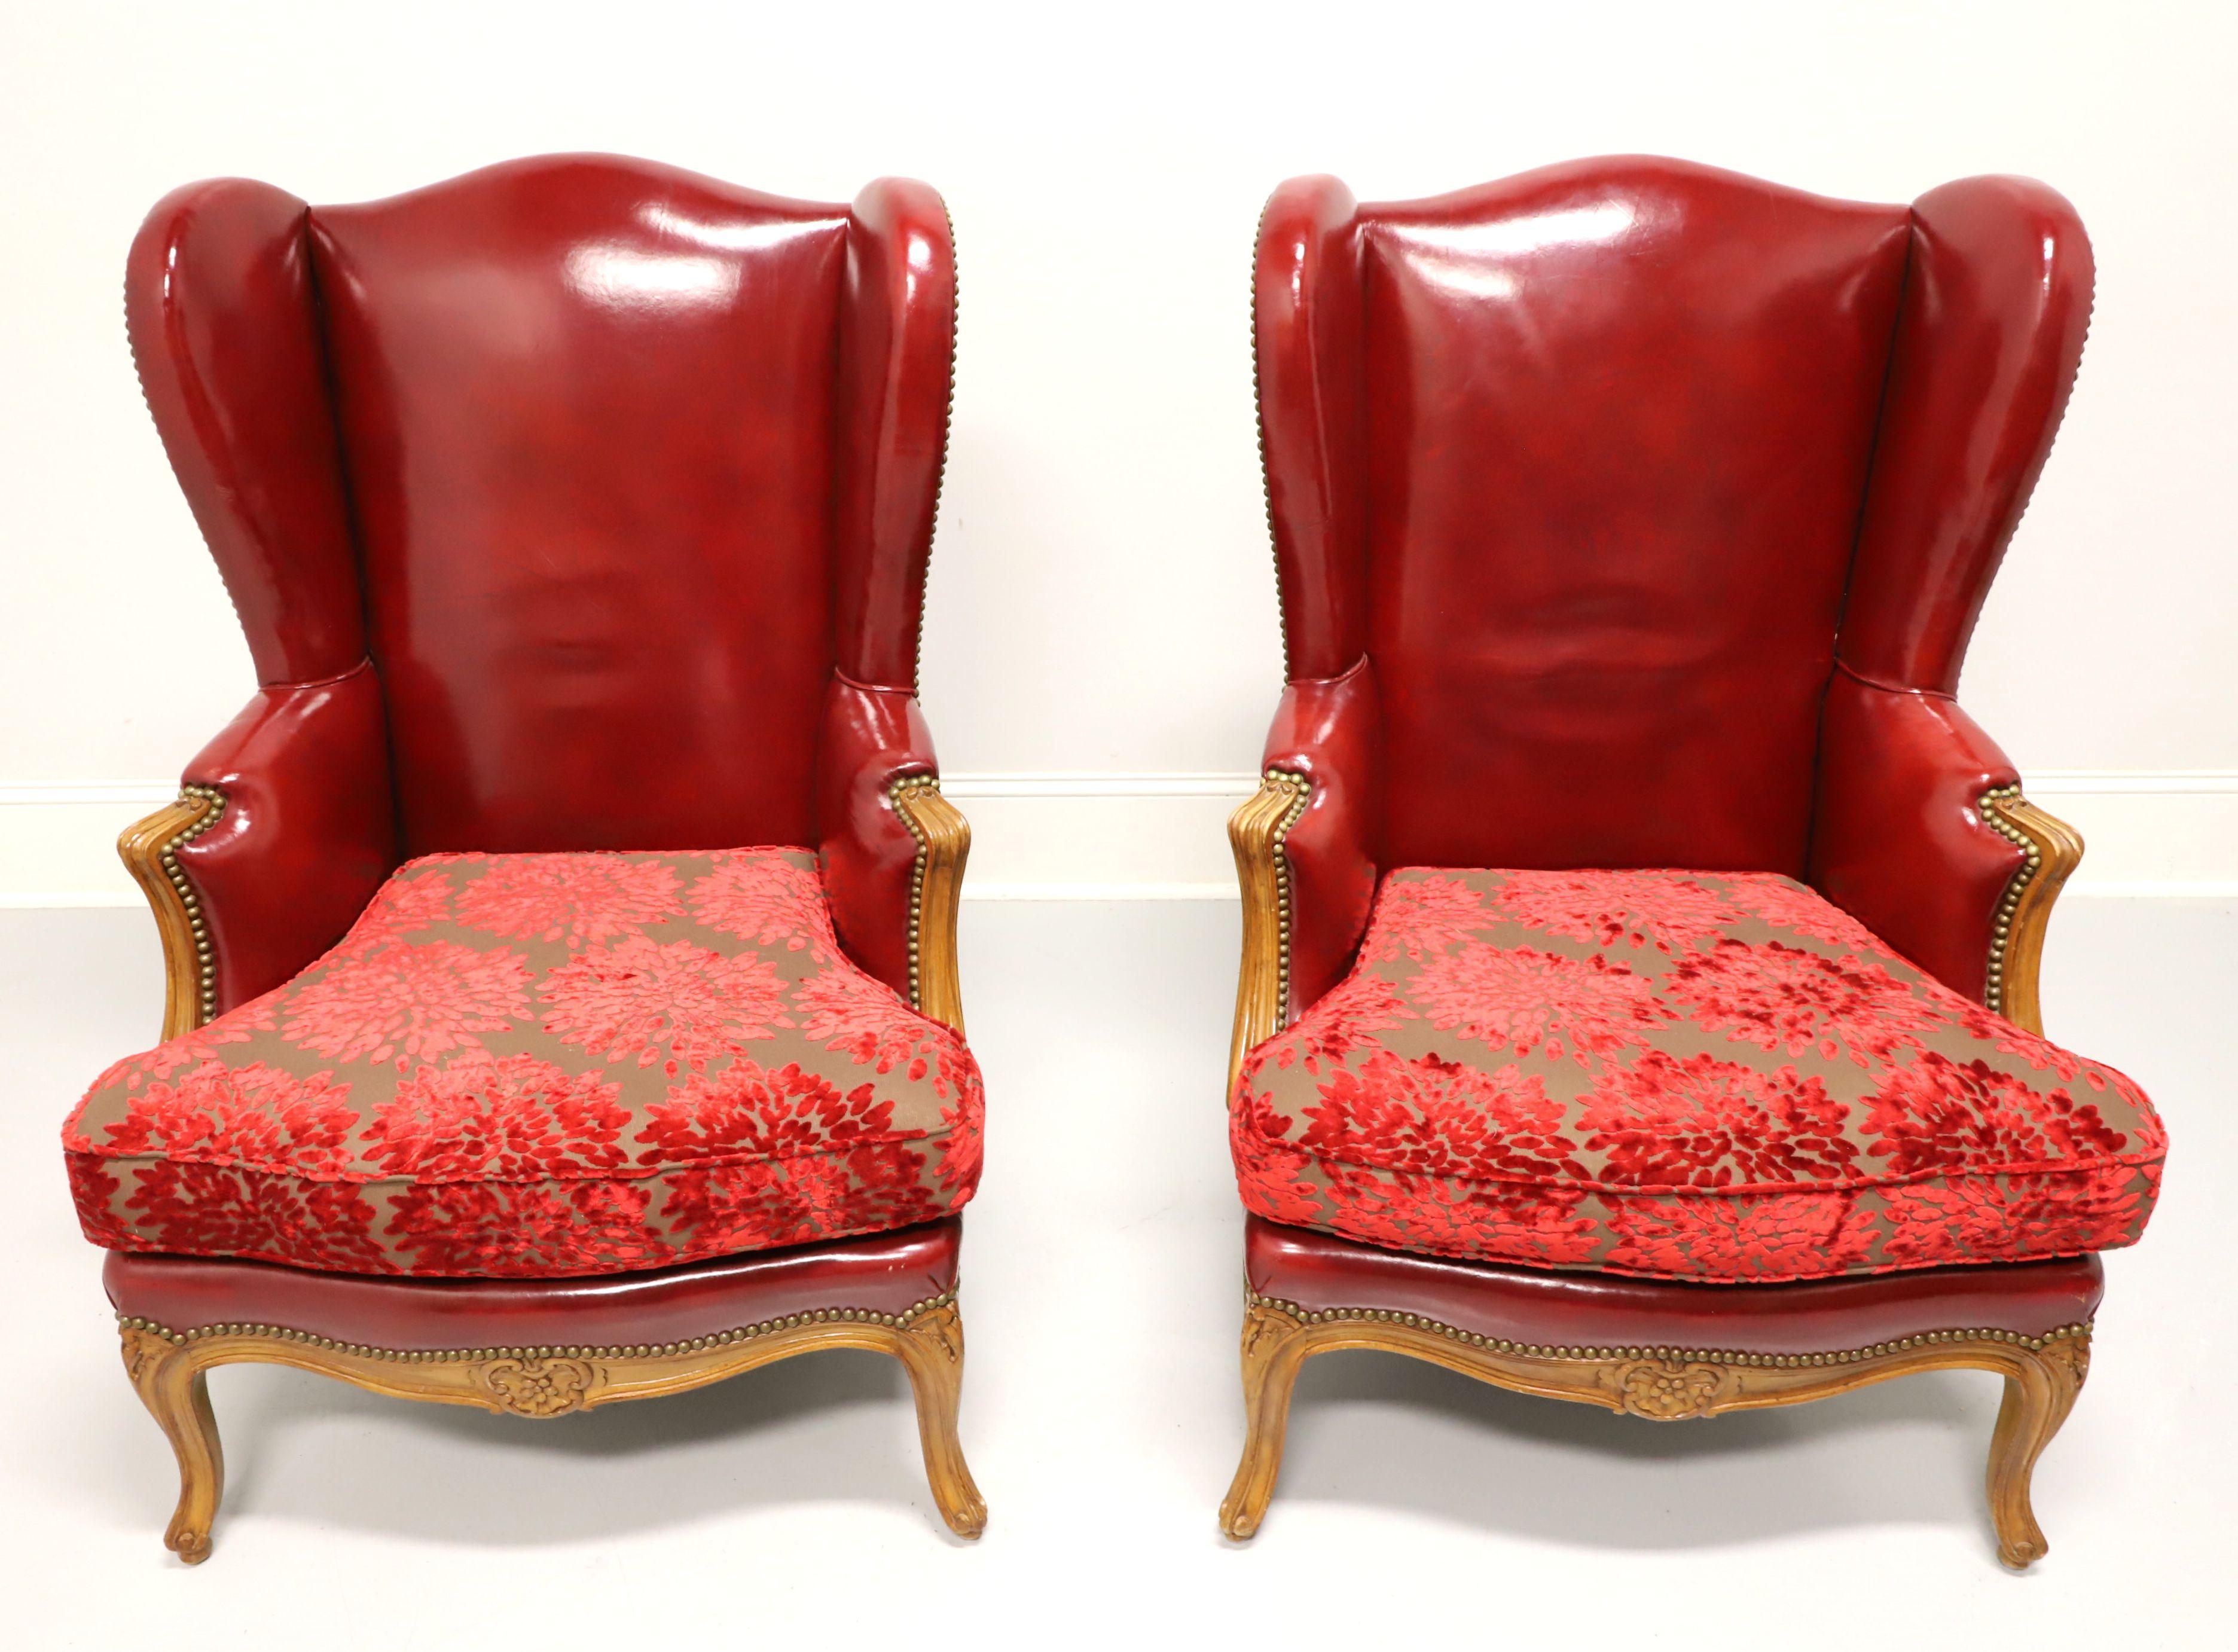 A pair of antique French Provincial Louis XV style wing back chairs, unbranded. Red leather upholstered with crushed velvet brocade fabric seat cushion, brass nailhead trim, nutwood frame with curved carved arms, carved apron, carved knees, curved